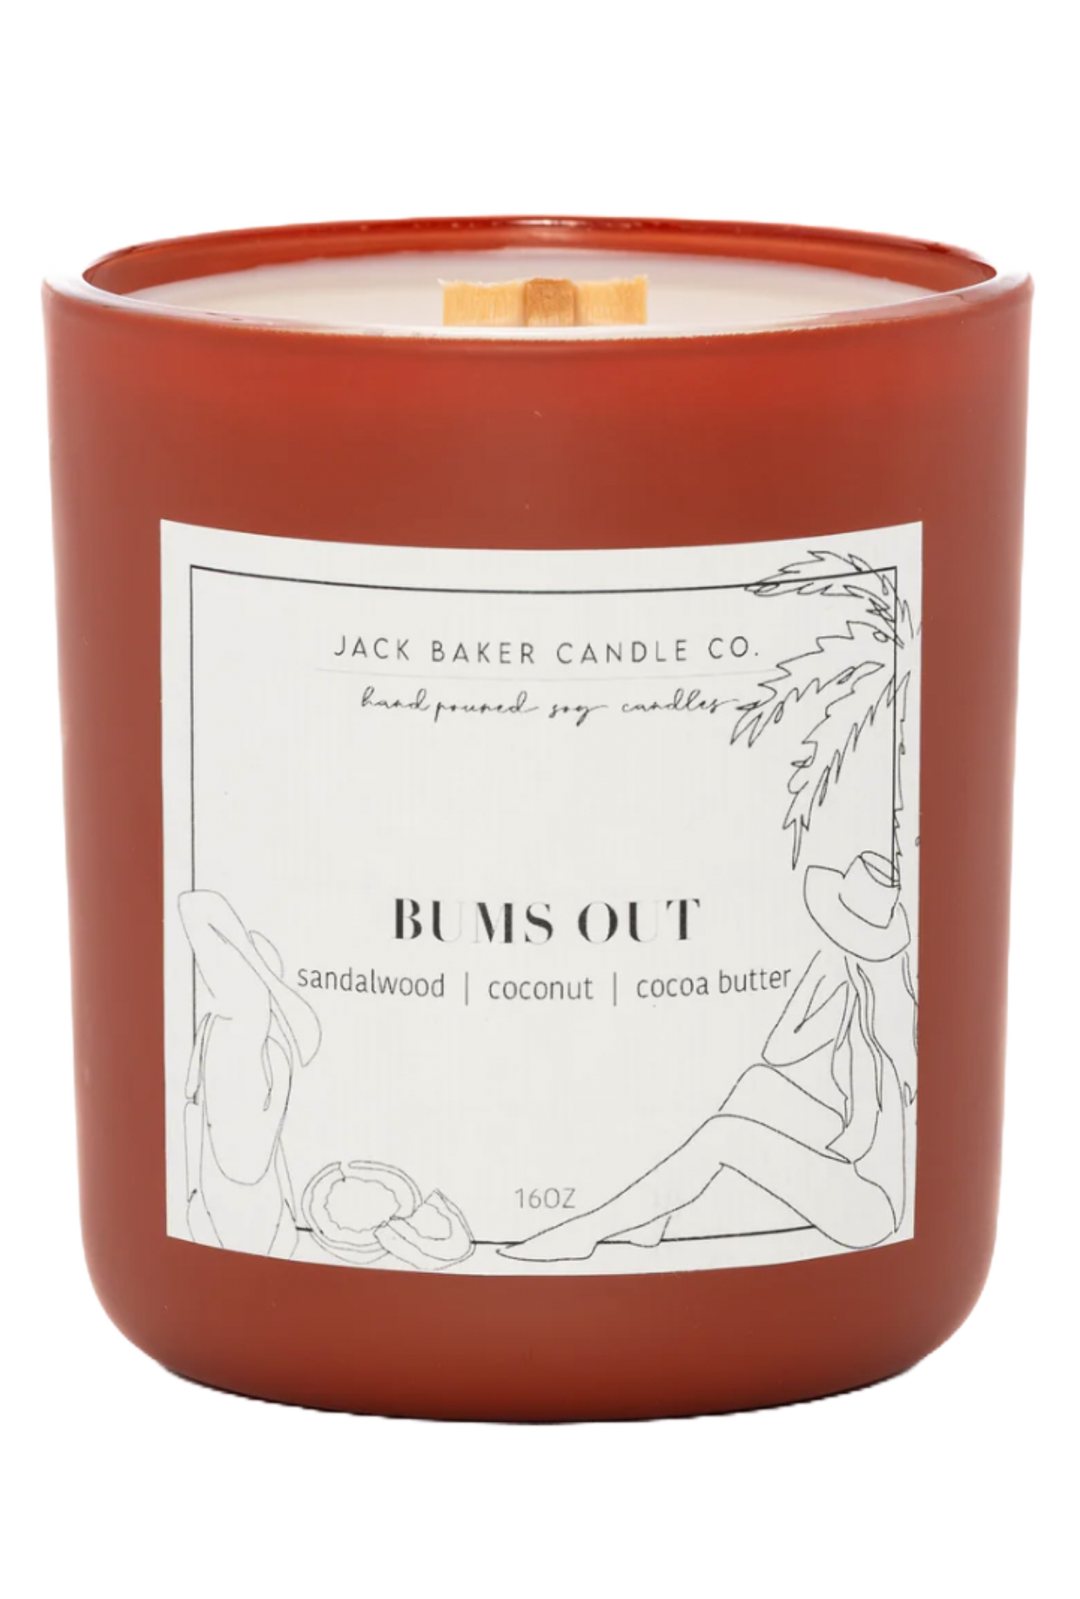 "Bums Out" Candle